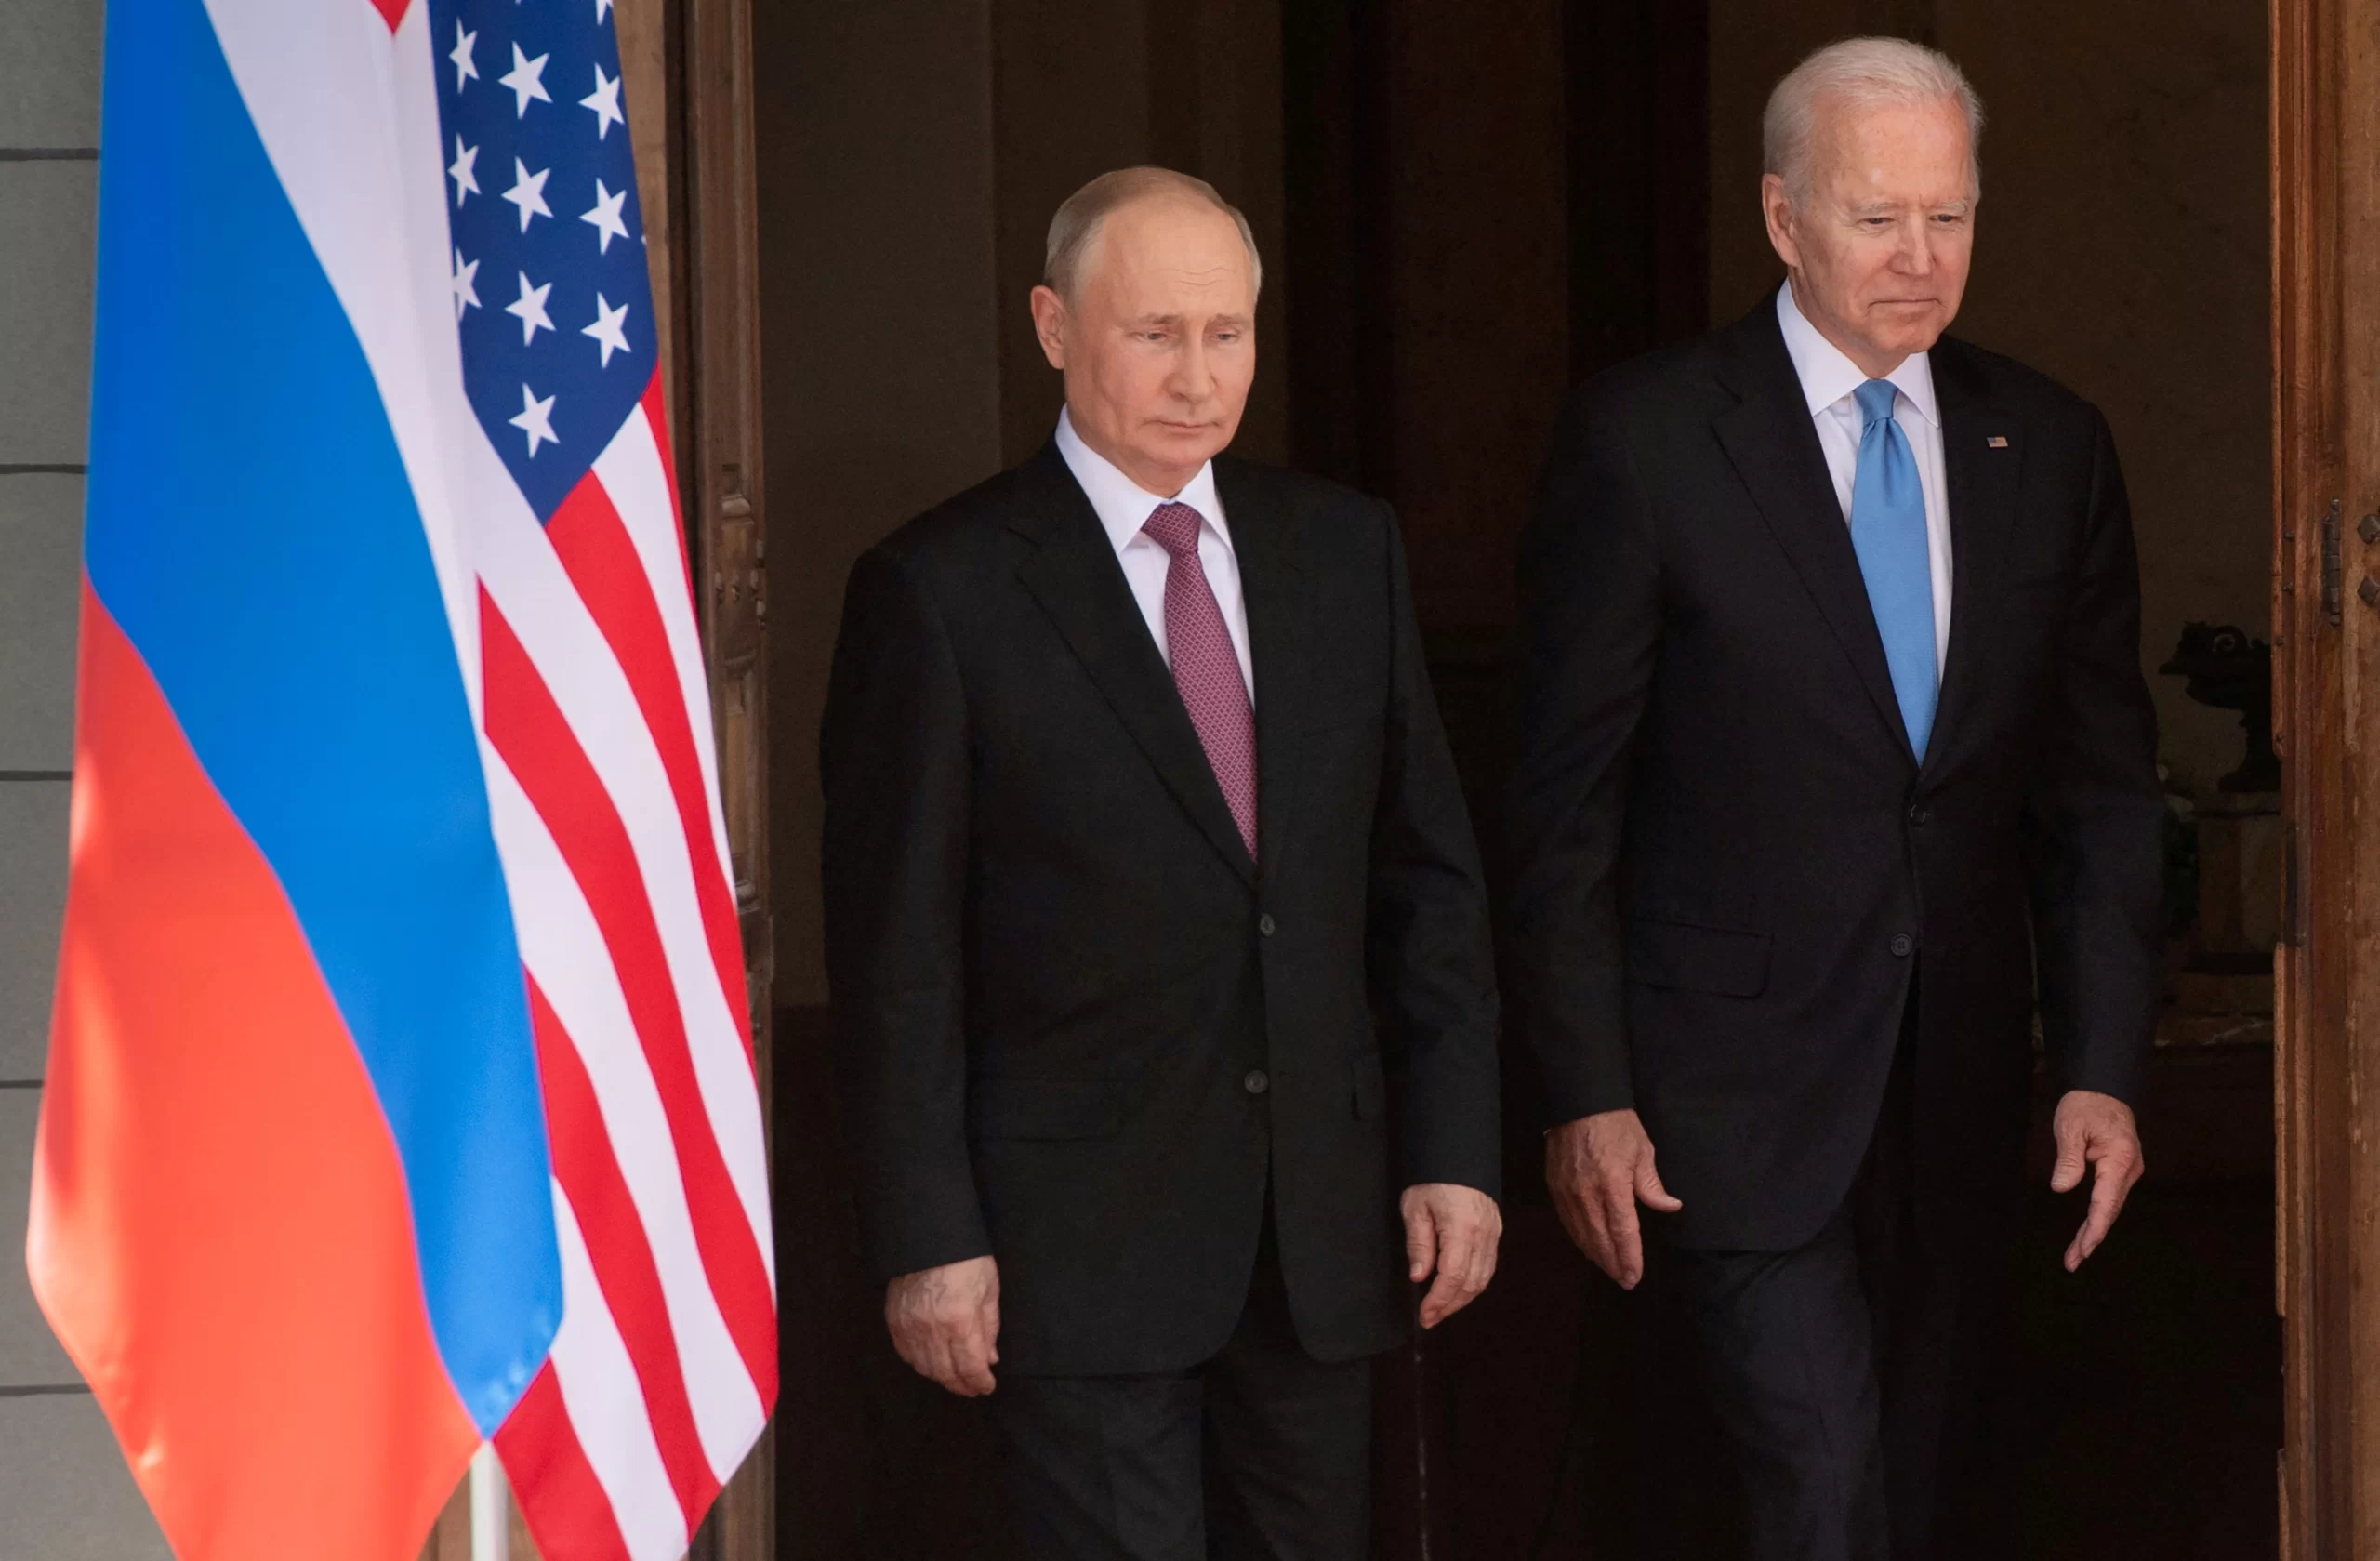 Will the West And Moscow Come To An Agreement anytime soon?